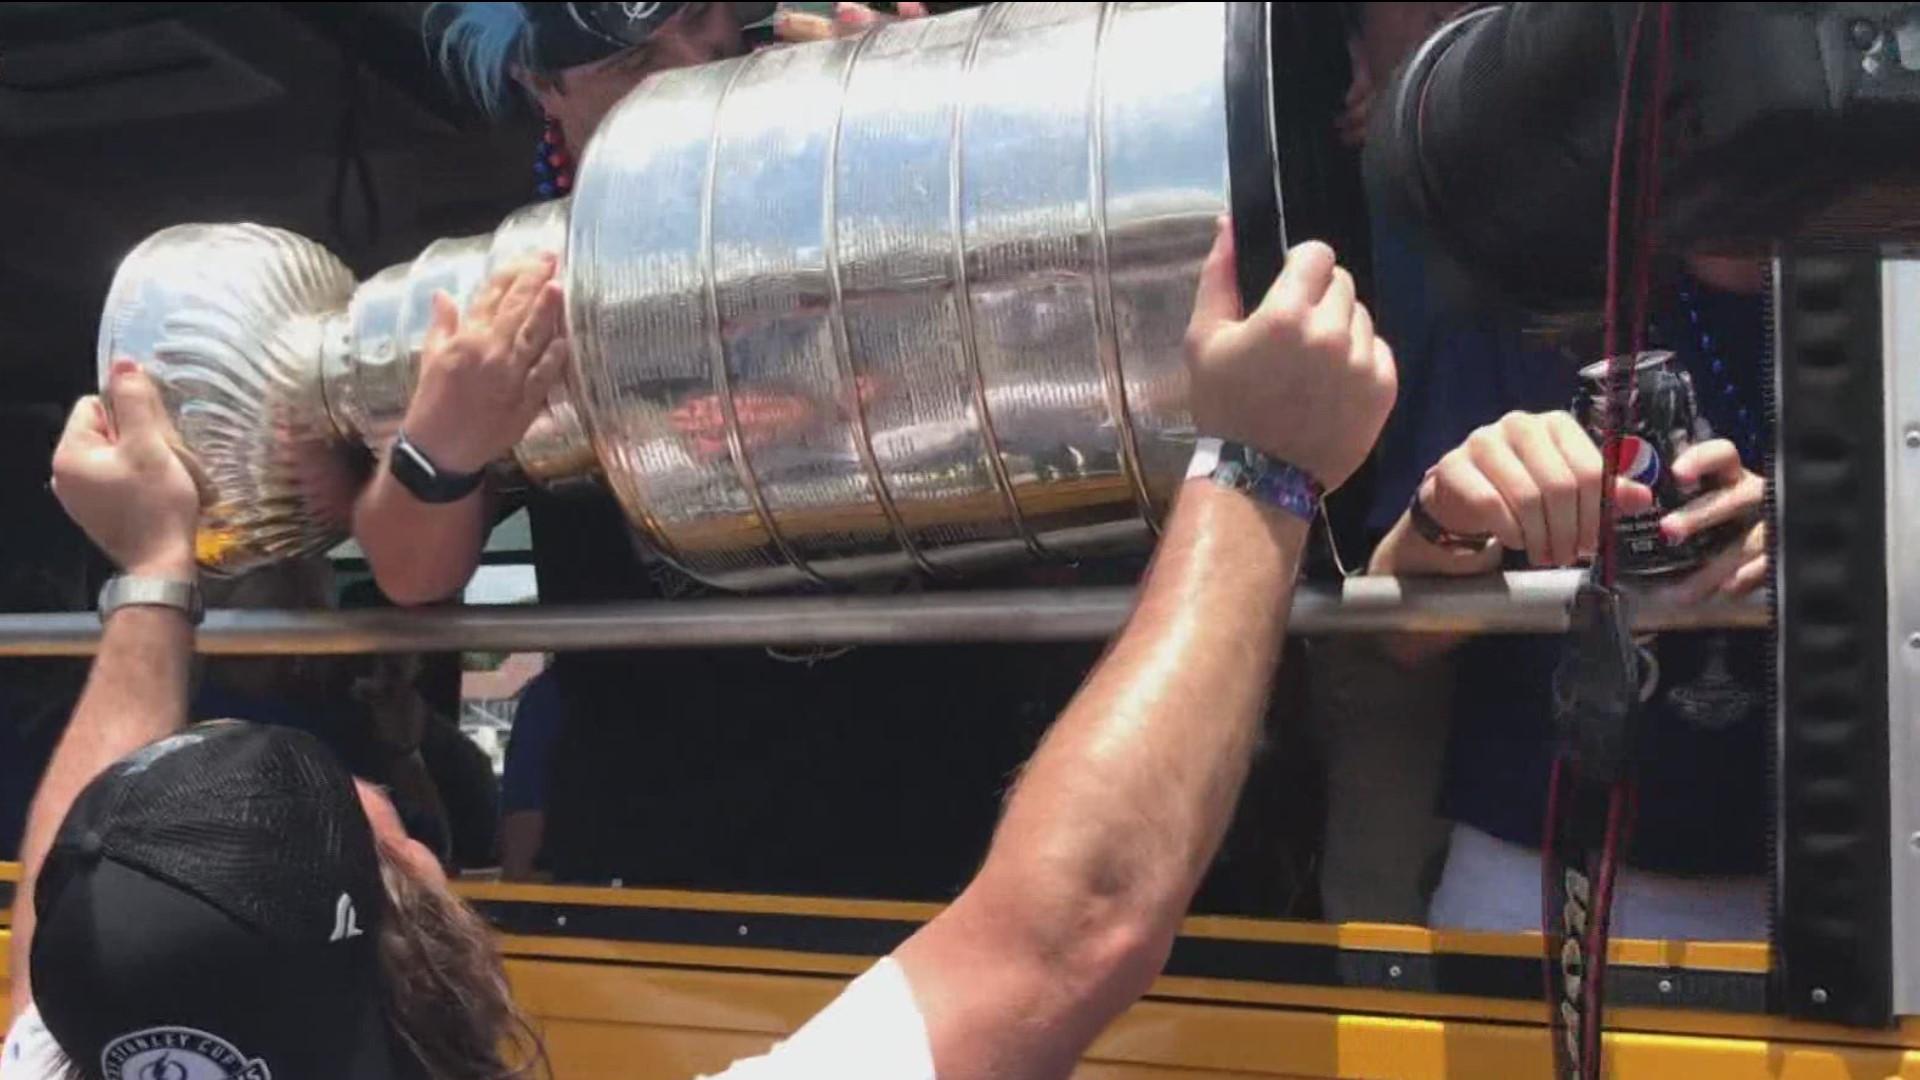 While the Stanley Cup didn't go for a swim during the Tampa Bay Lightning boat parade, it did sustain some apparent upper-body injury, the team confirmed.